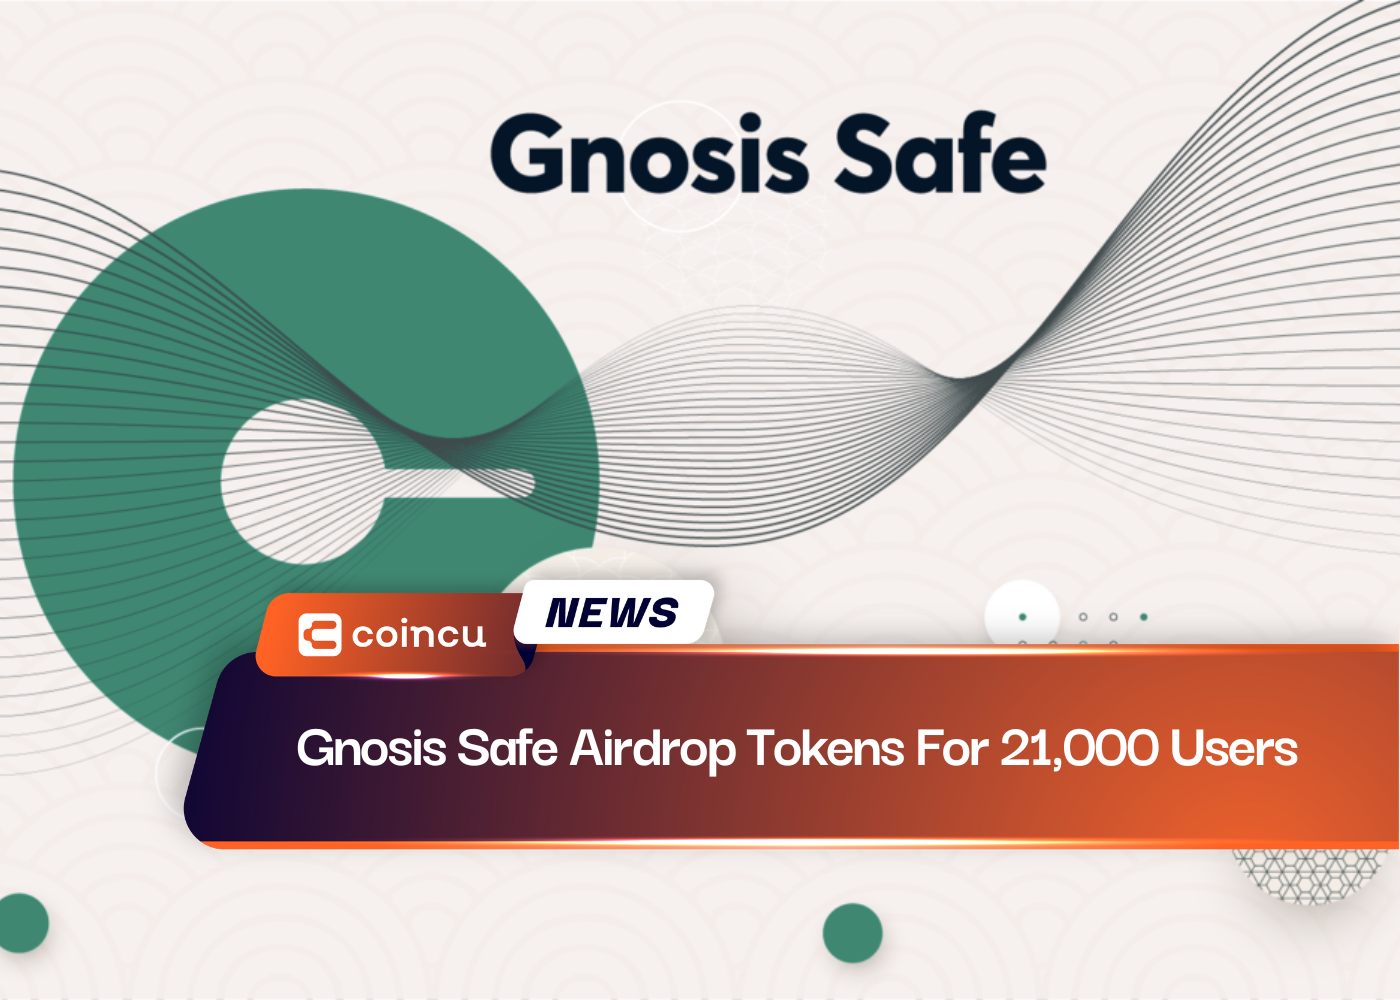 Gnosis Safe Airdrop Tokens For 21,000 Users